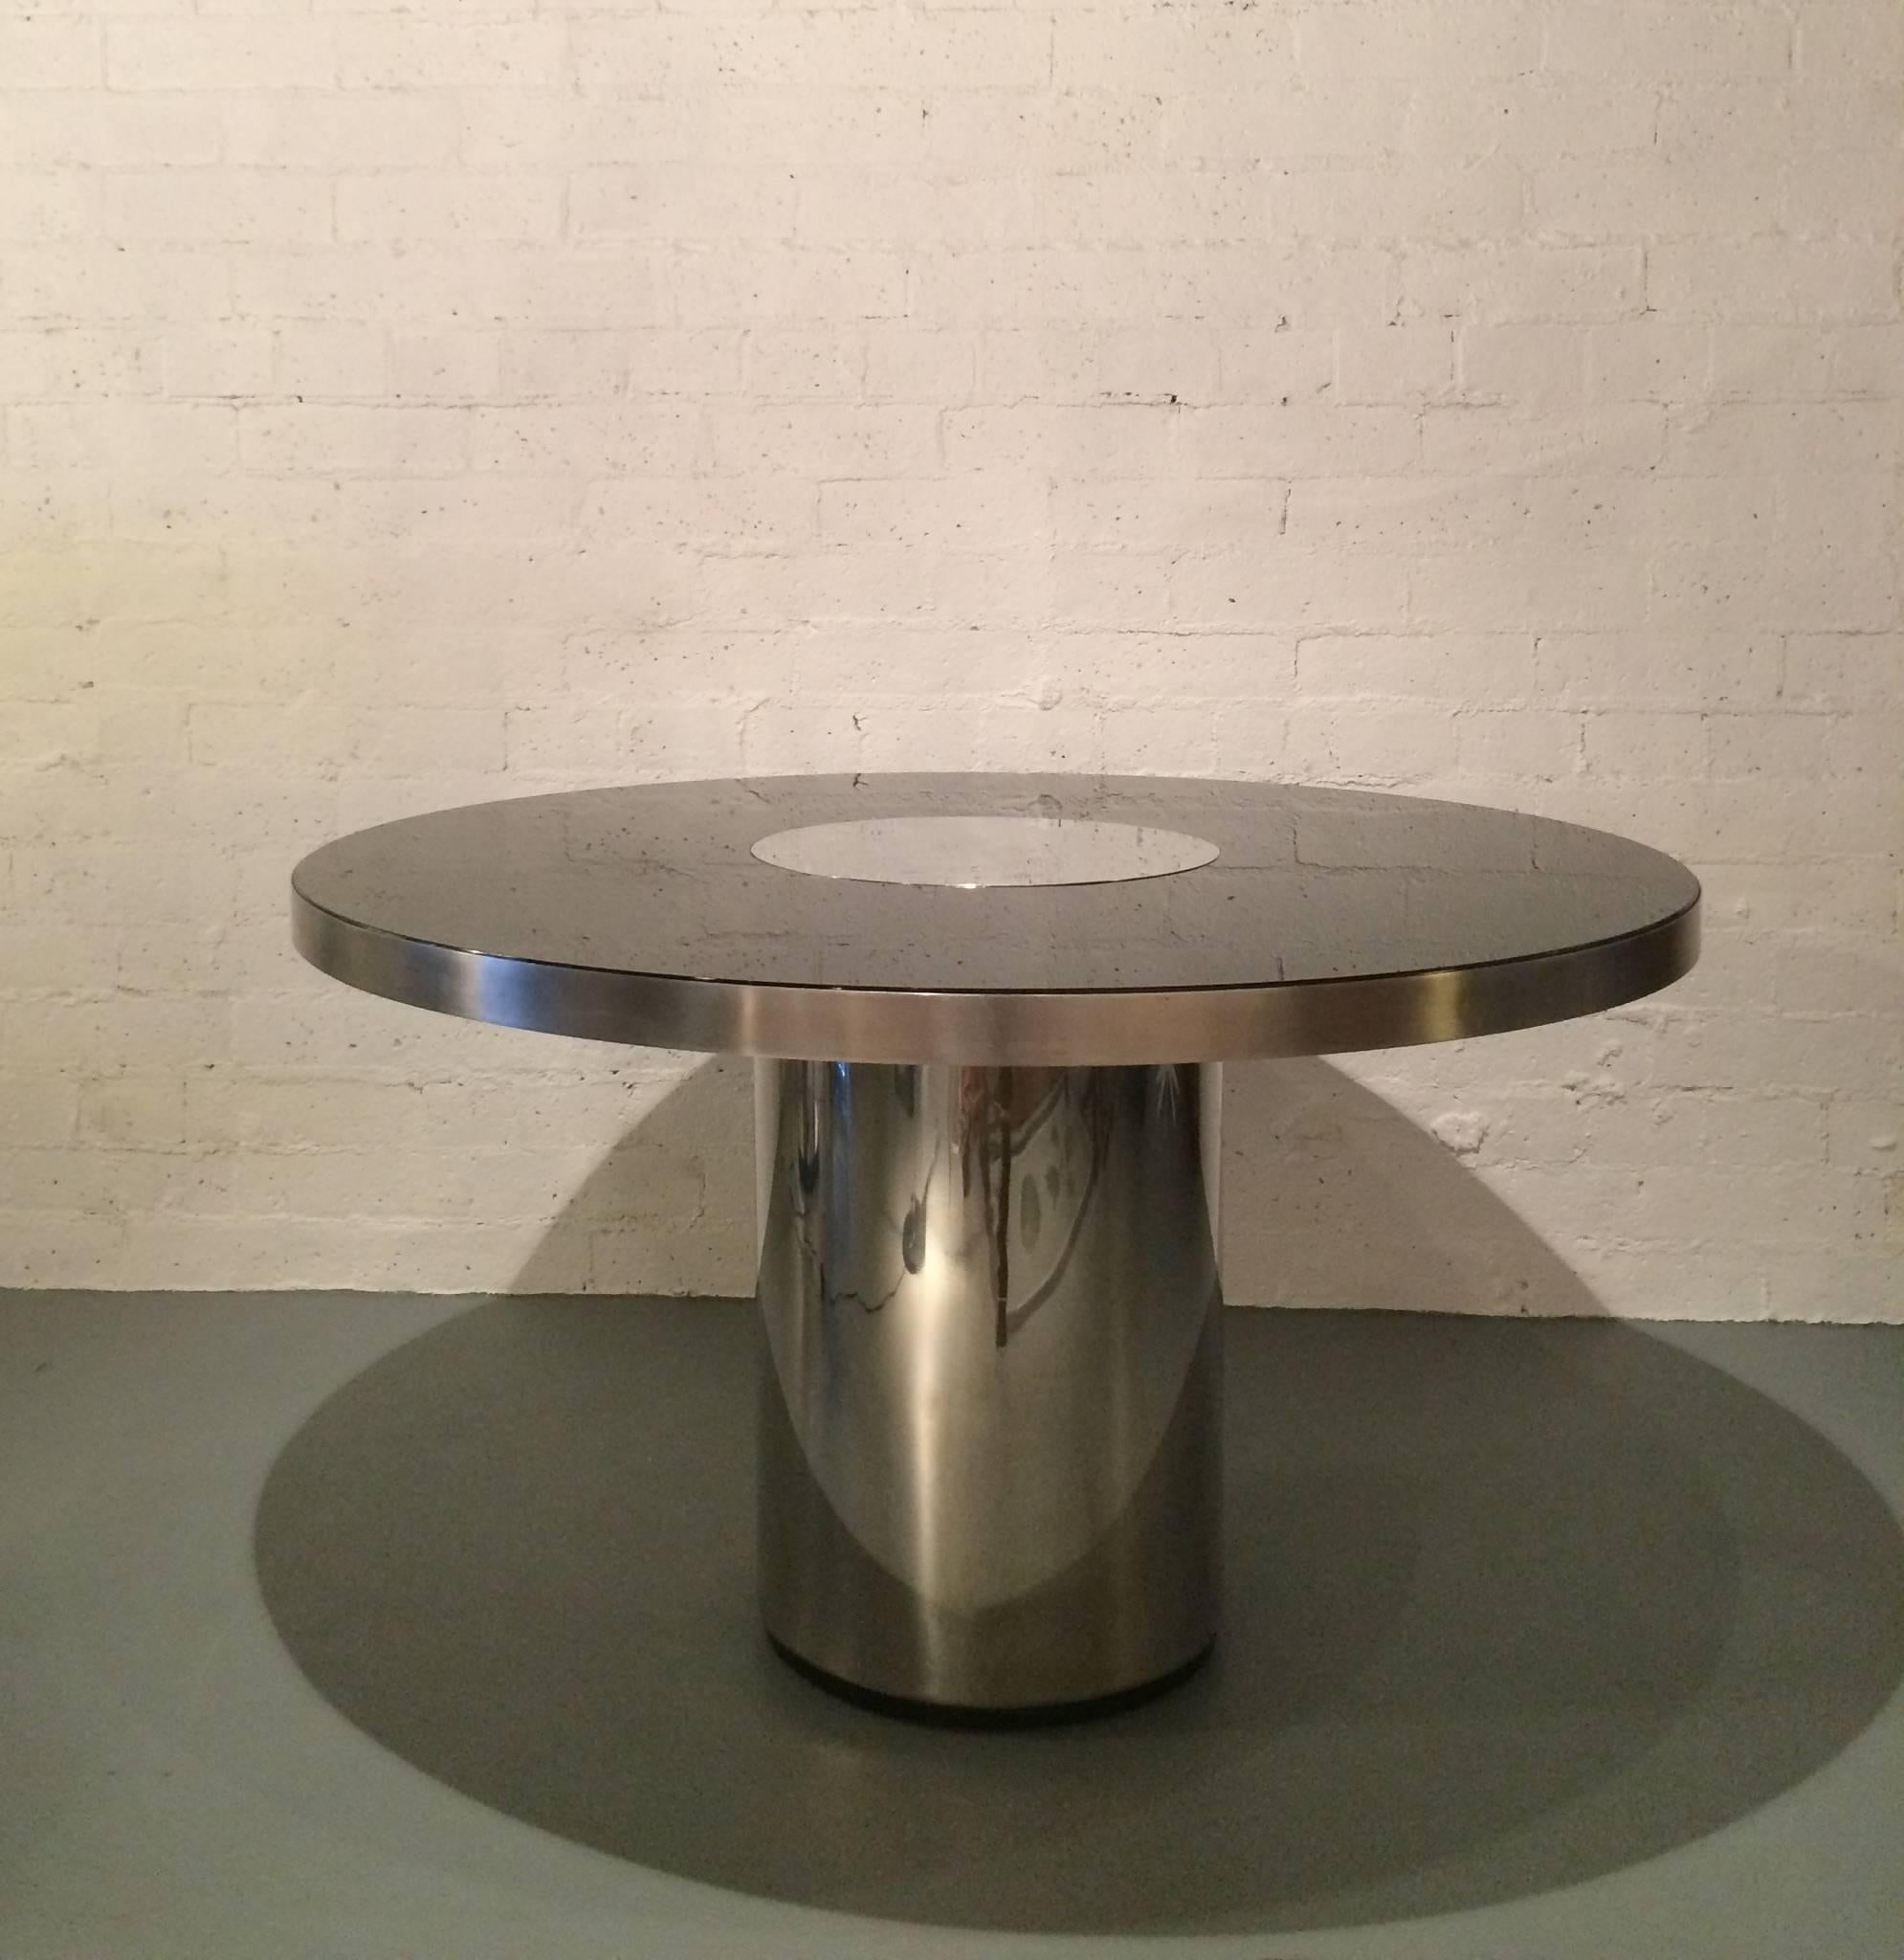 A rare glamorous polished stainless steel and smoked glass top dining table designed by Willy Rizzo in the 1970s. 
 The table has a 1/2